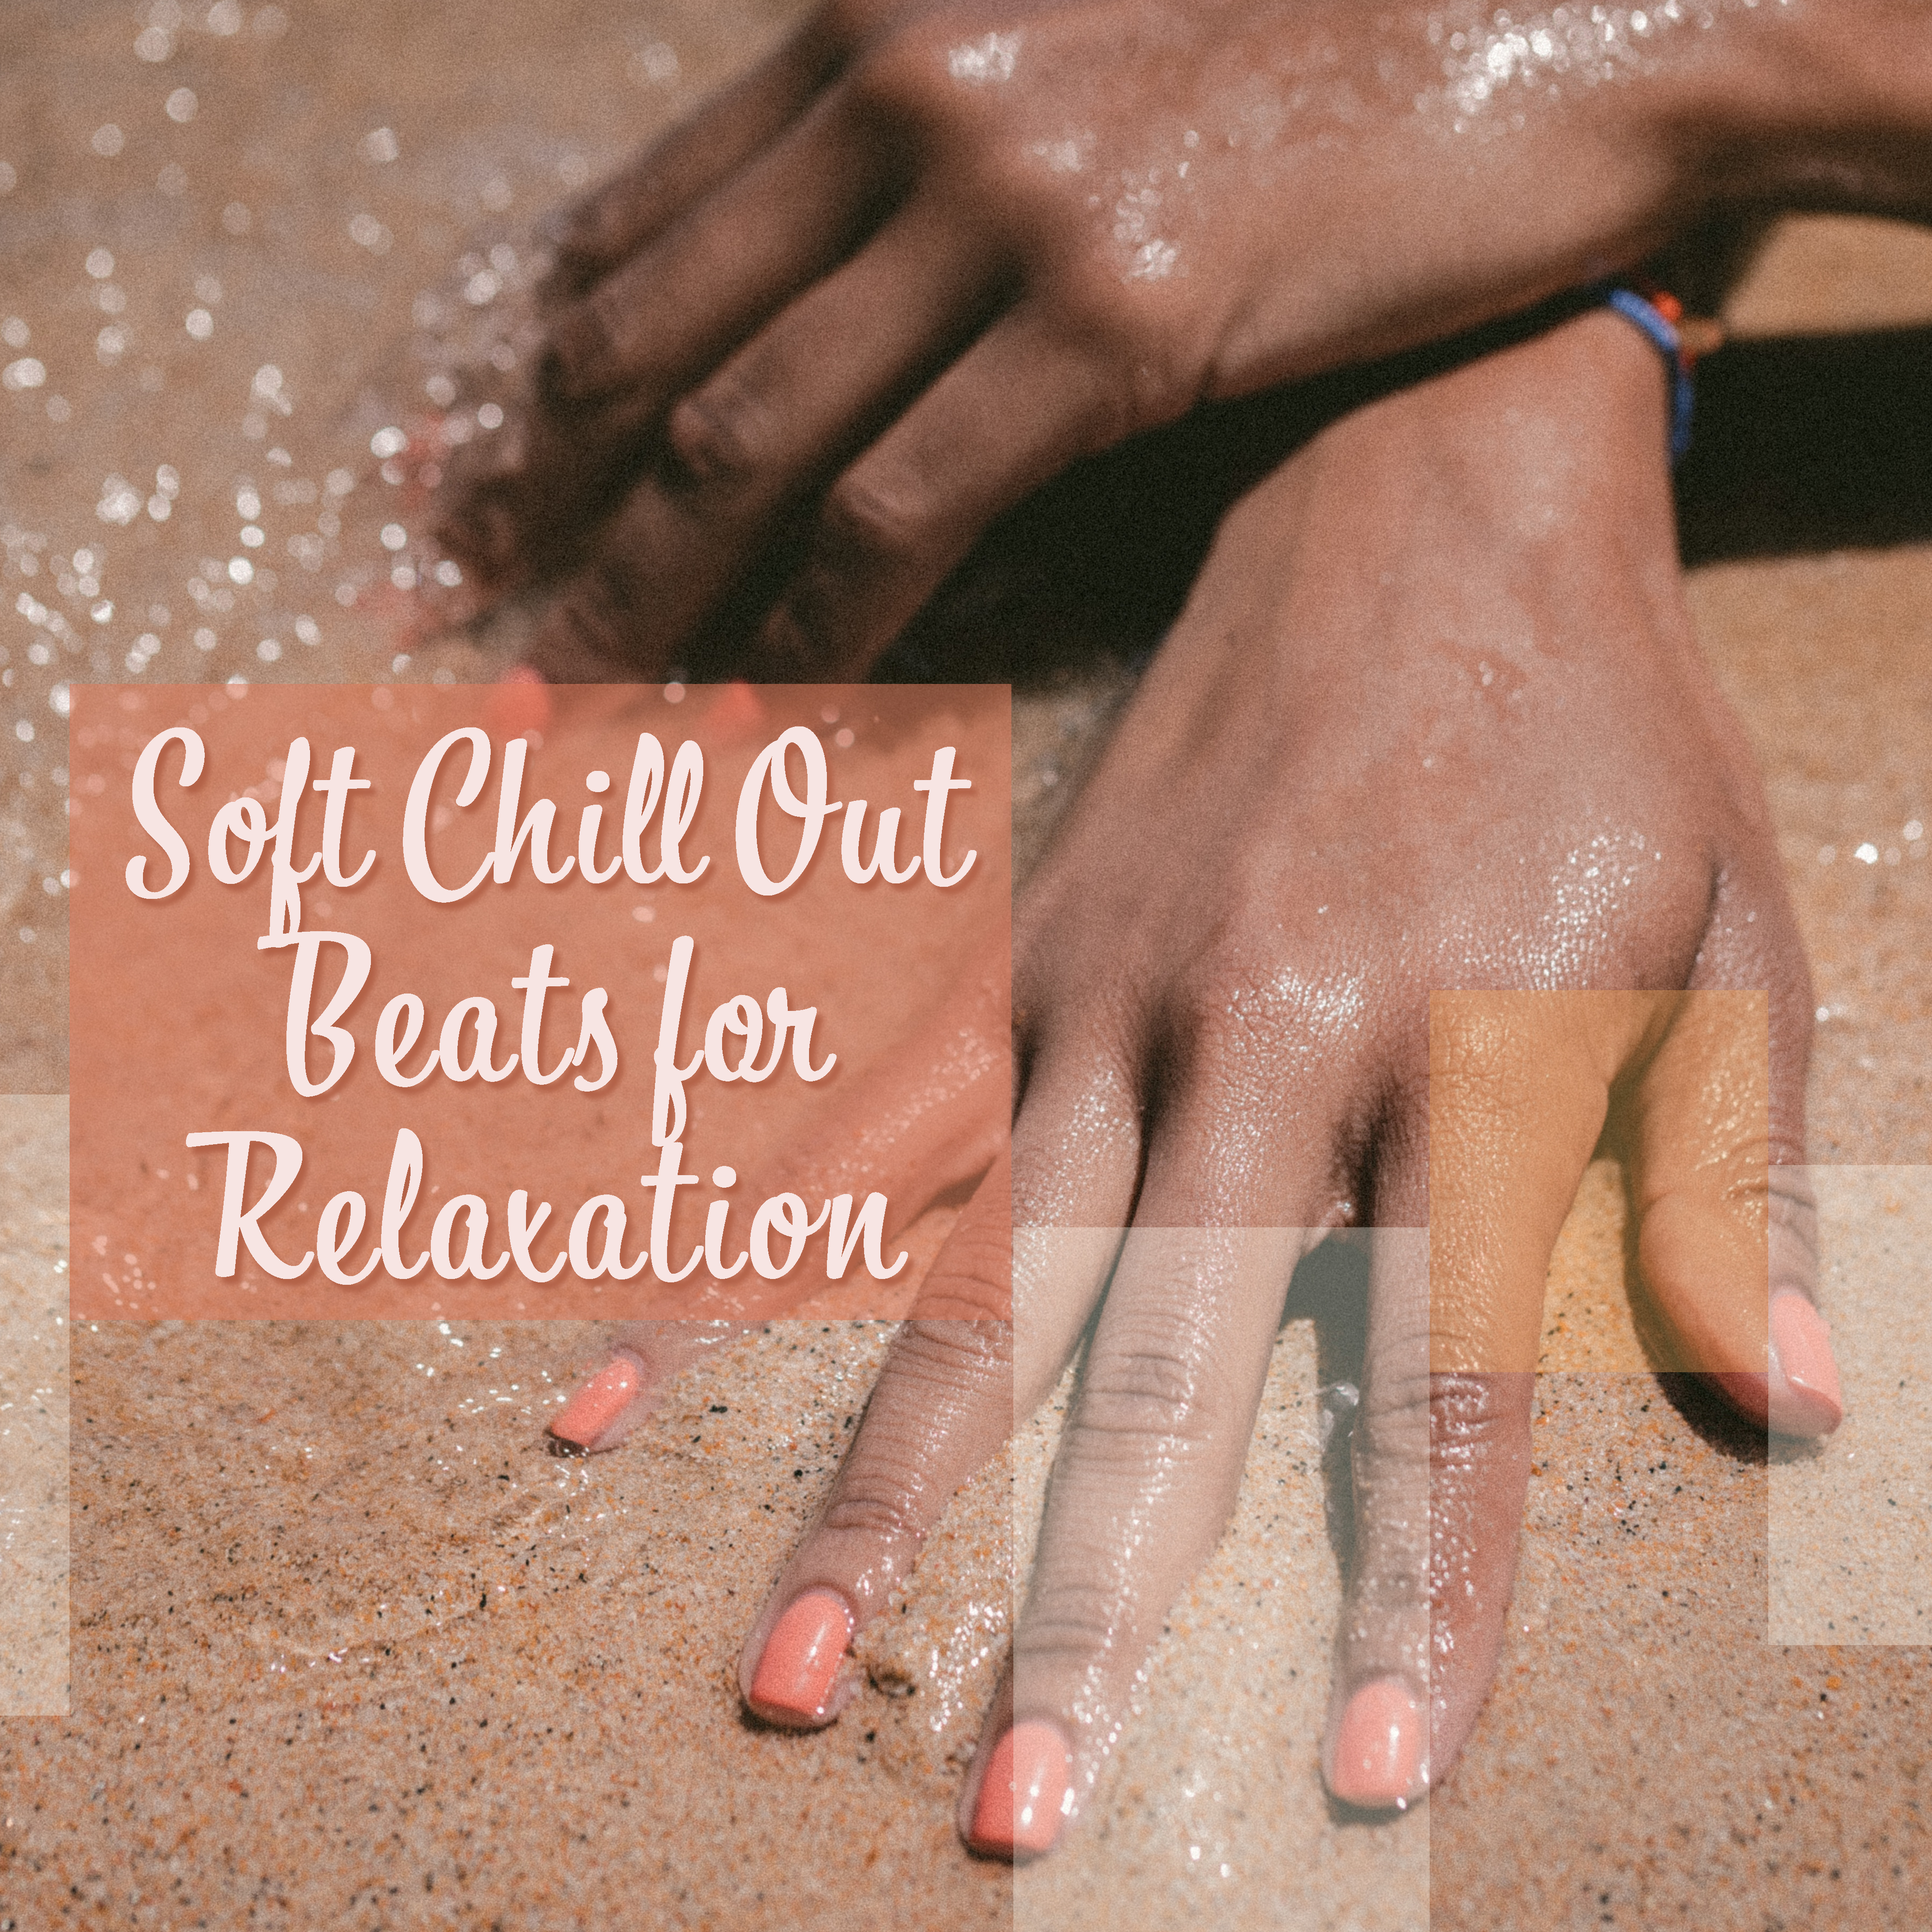 Soft Chill Out Beats for Relaxation  Peaceful Sounds to Calm Down, Stress Relief, Chill Out Rest, Tropical Island